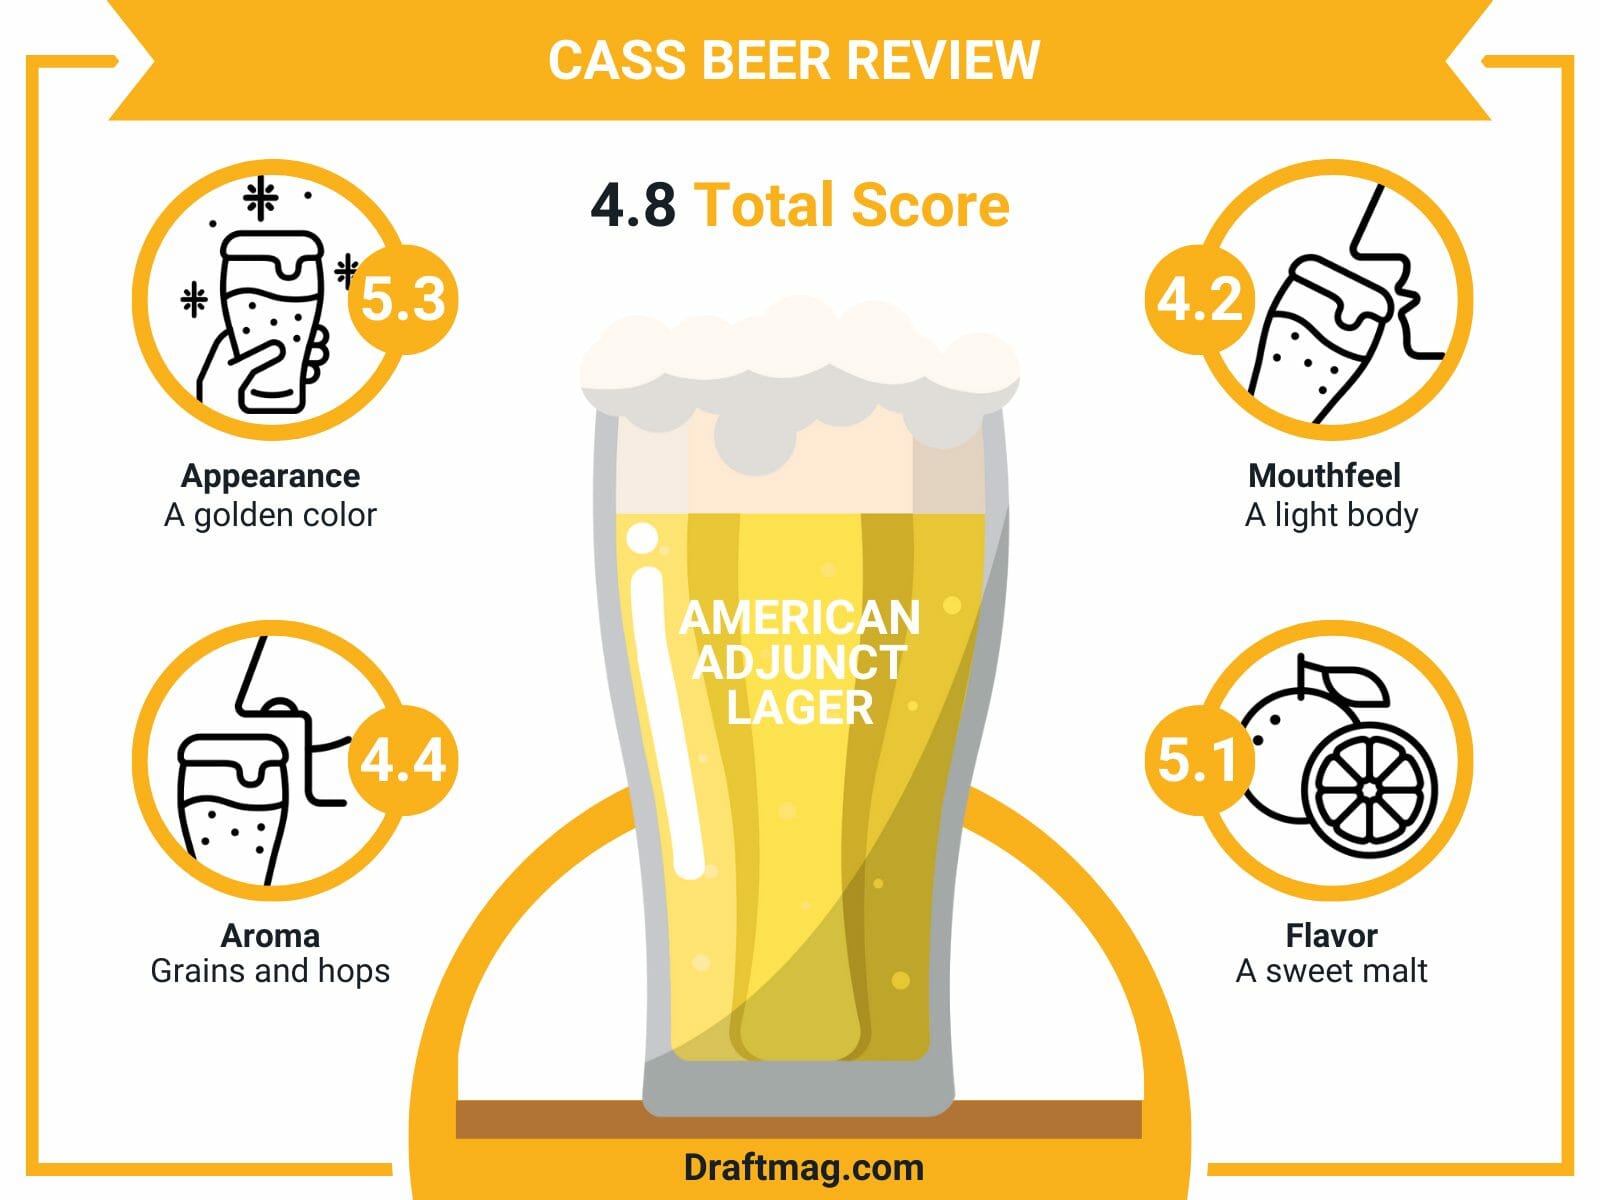 Cass beer review infographic